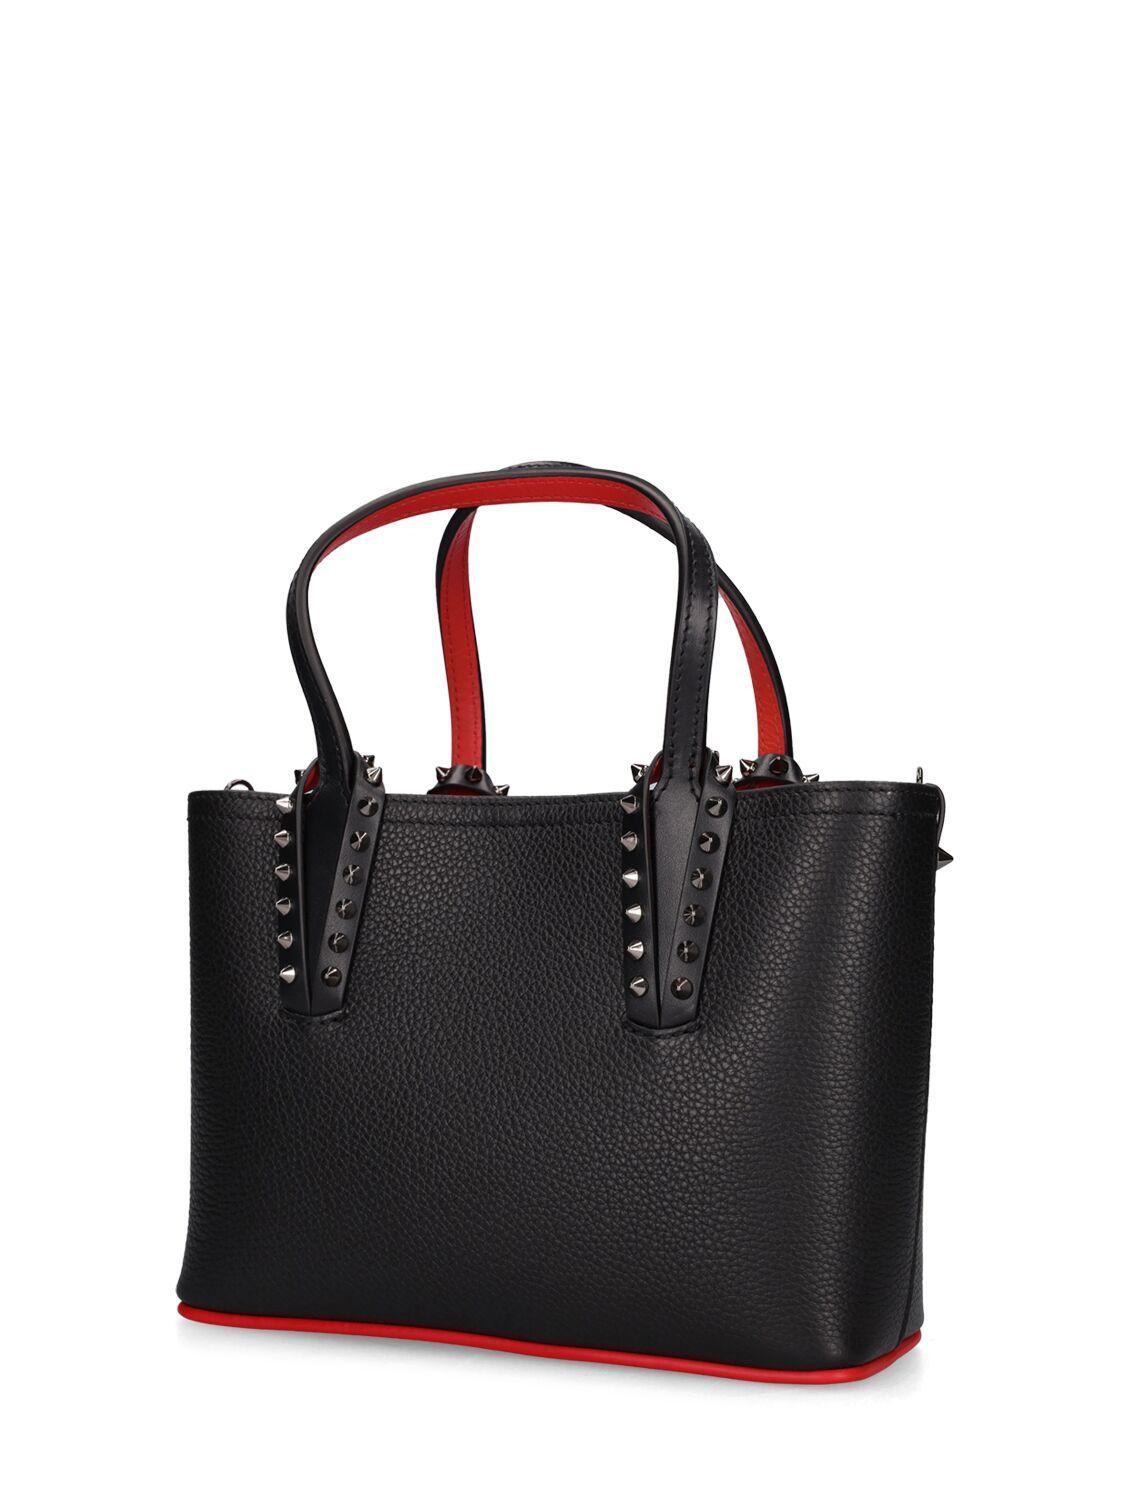 Cabata Stud Embellished Leather Tote in Black - Christian Louboutin